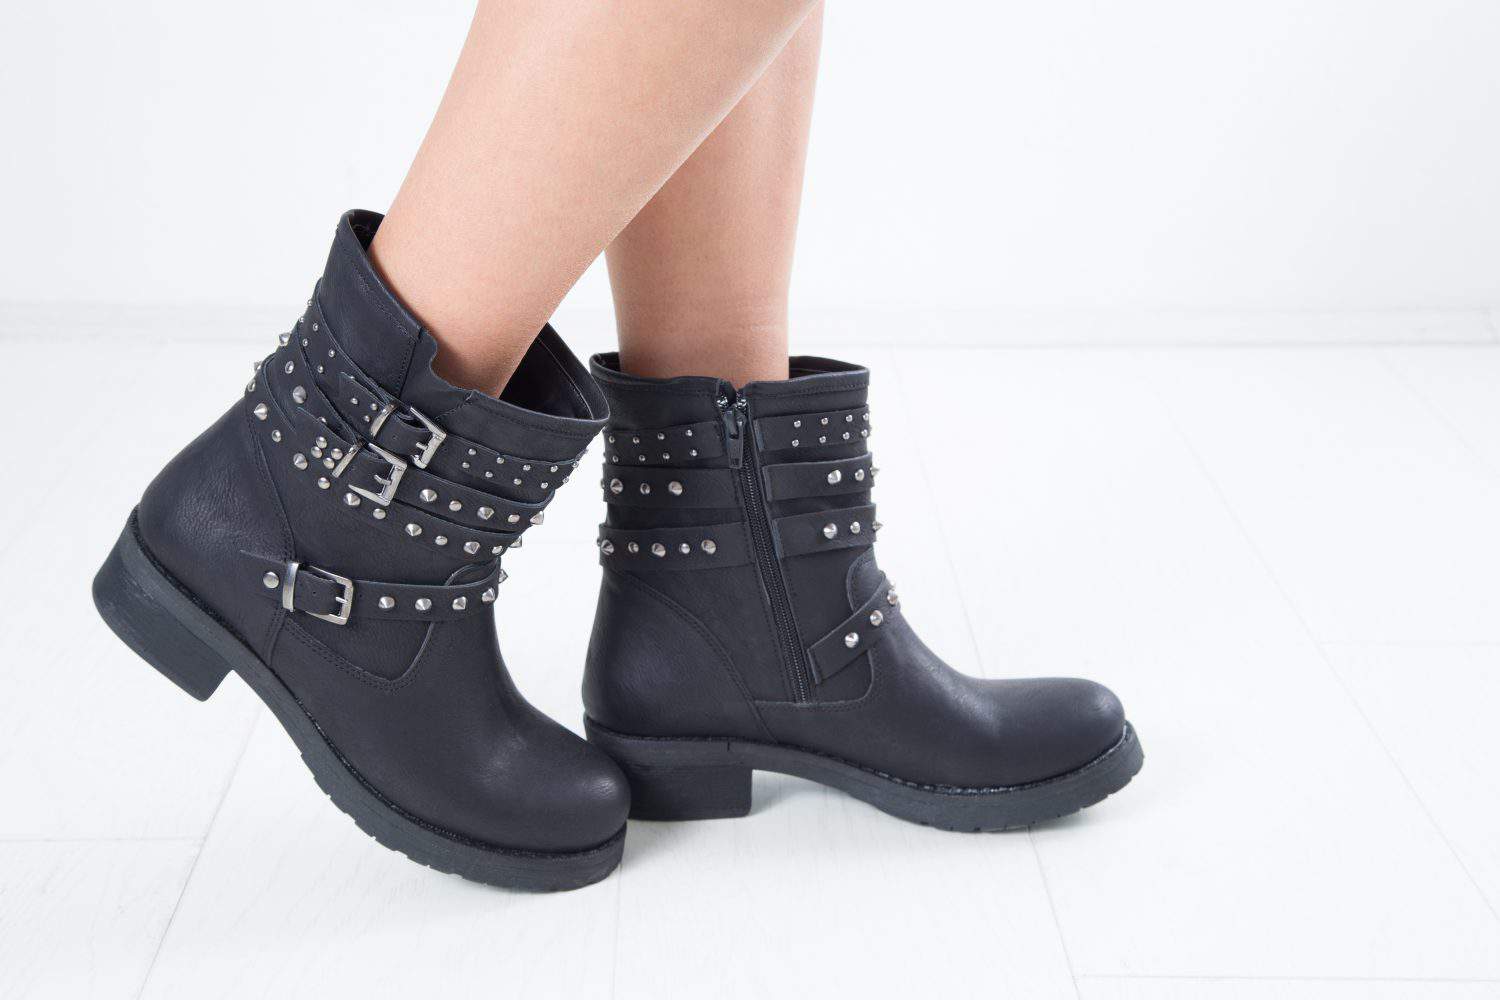 Side View Of Woman's Black Leather Ankle Boots With Straps, Metal Studs And Zipper, Studio Shot Over White Background